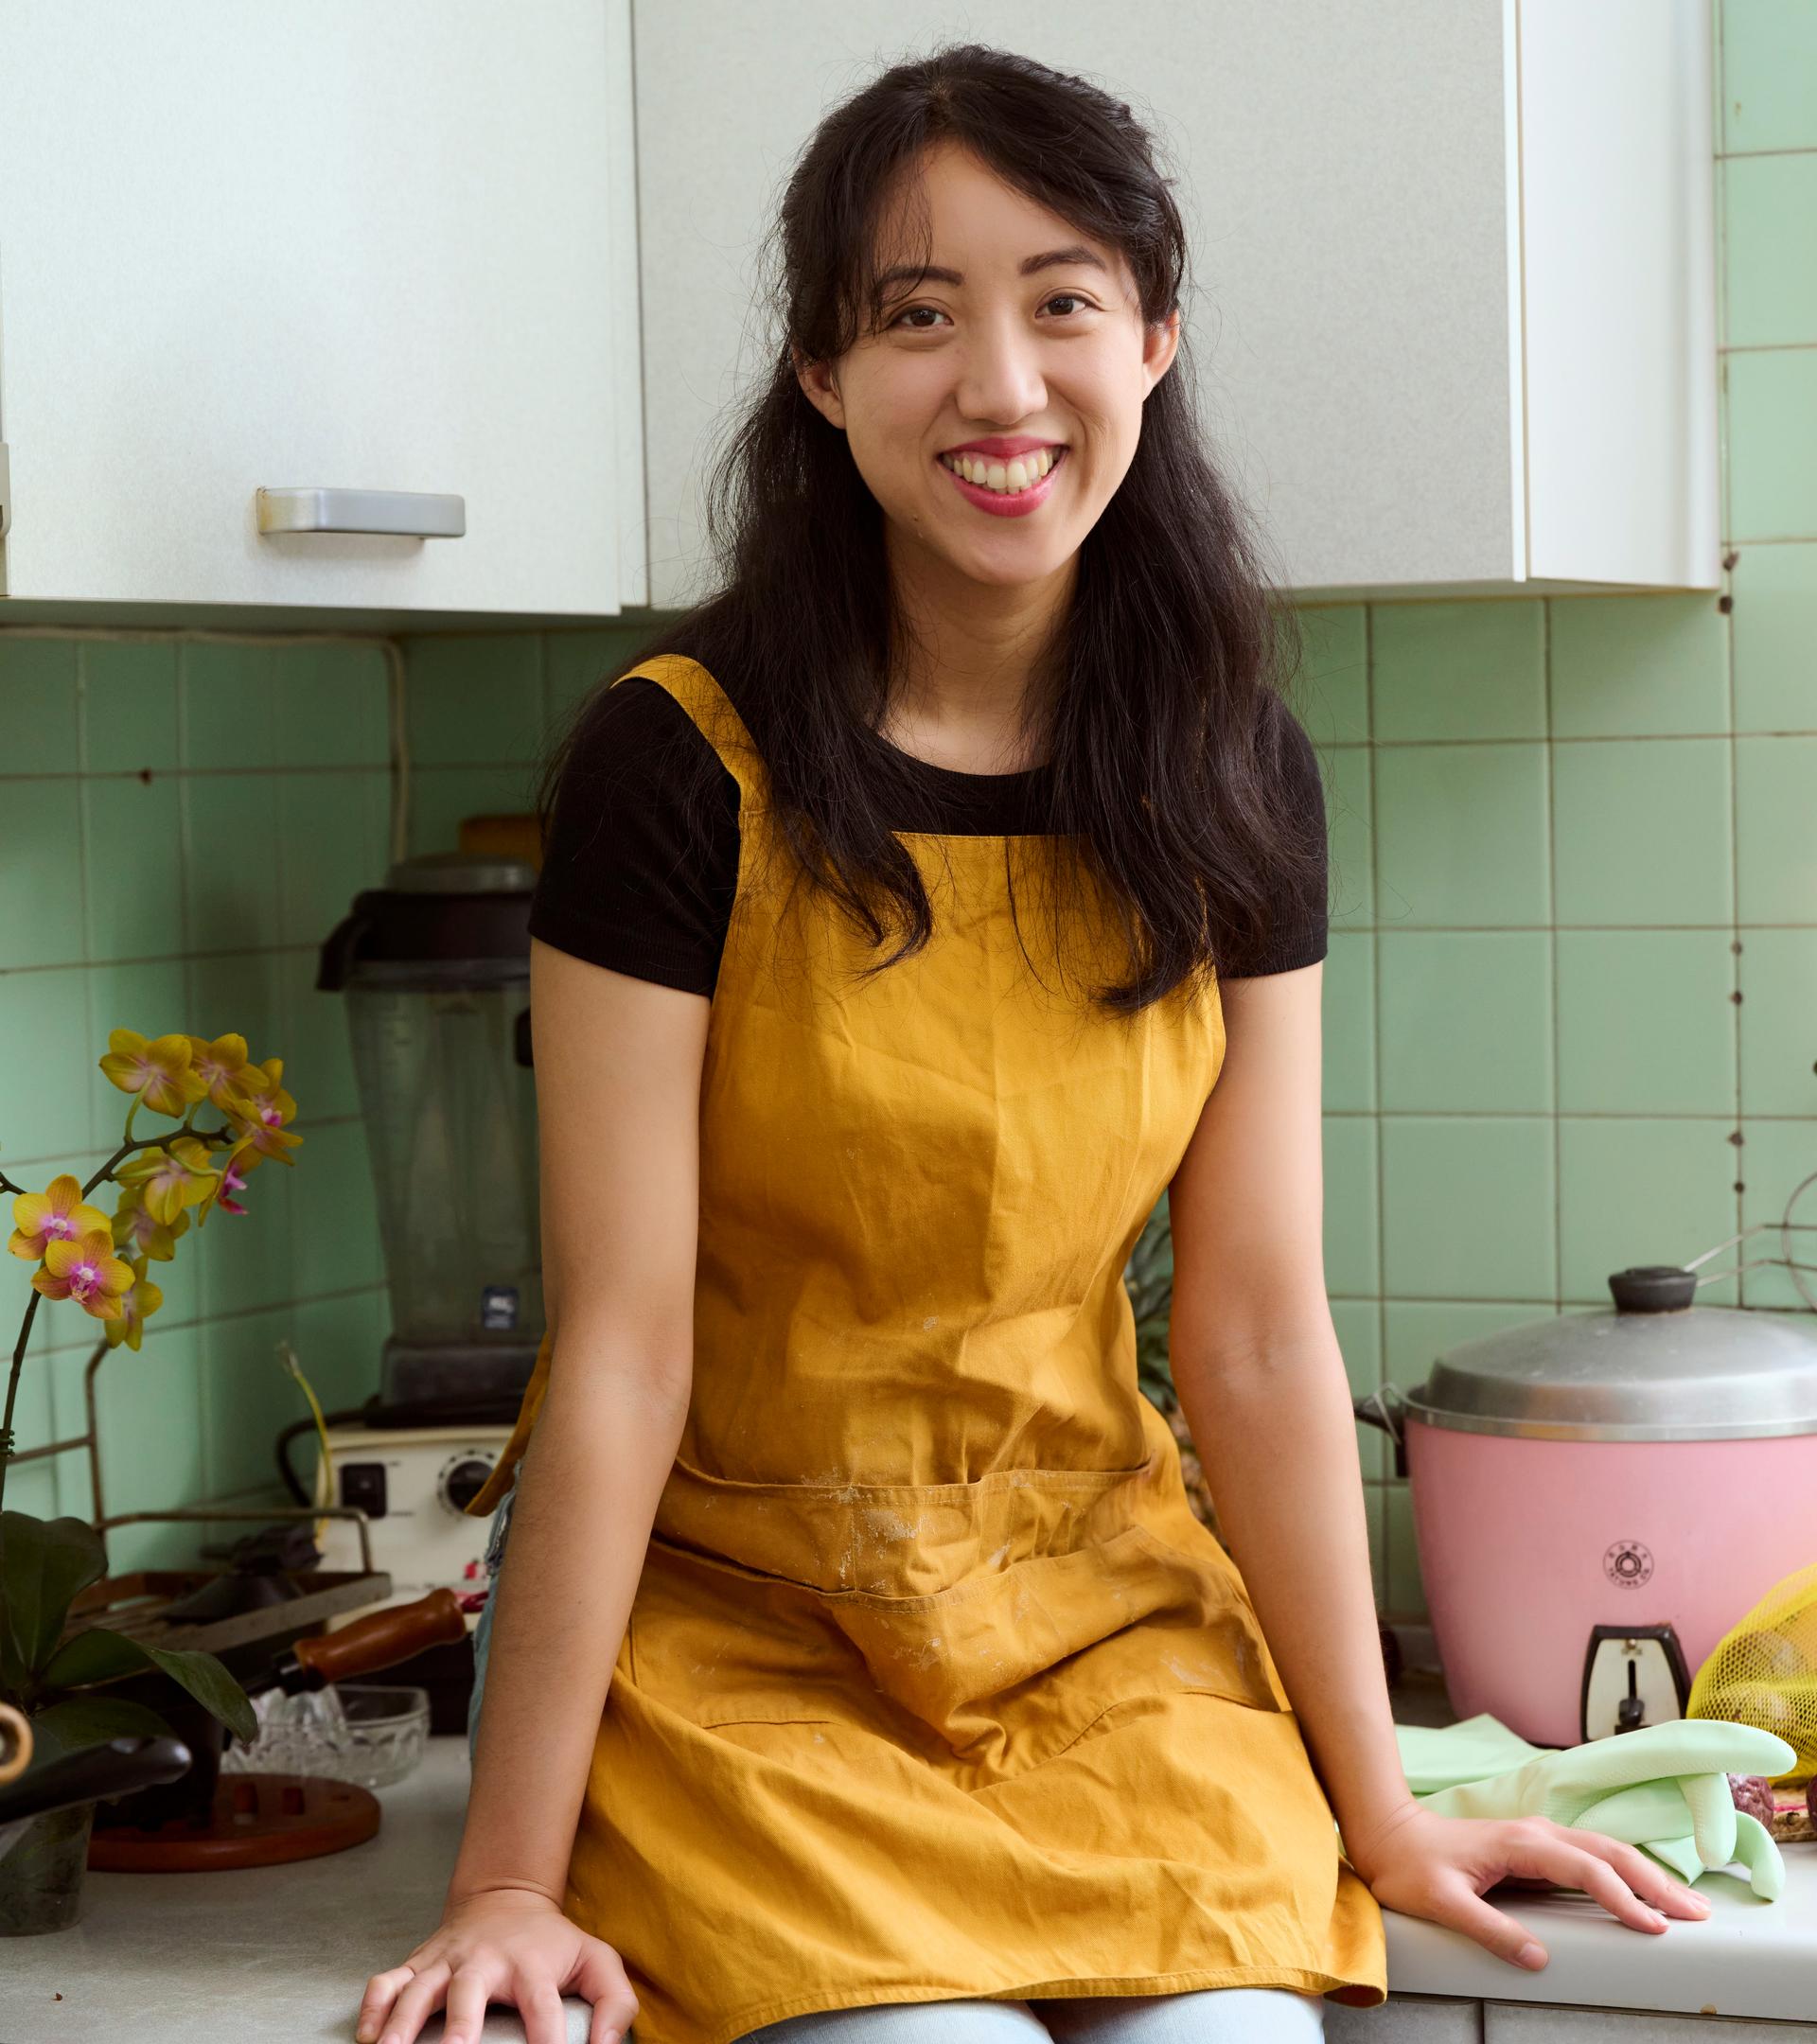 A portrait of an Taiwanese author and journalist Clarissa Wei, in a yellow apron with a kitchen backdrop.